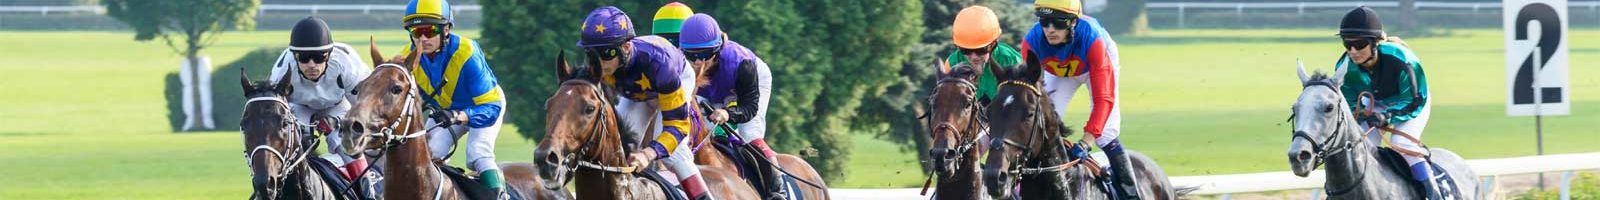 Live Horse Racing Online Streams Watch Free